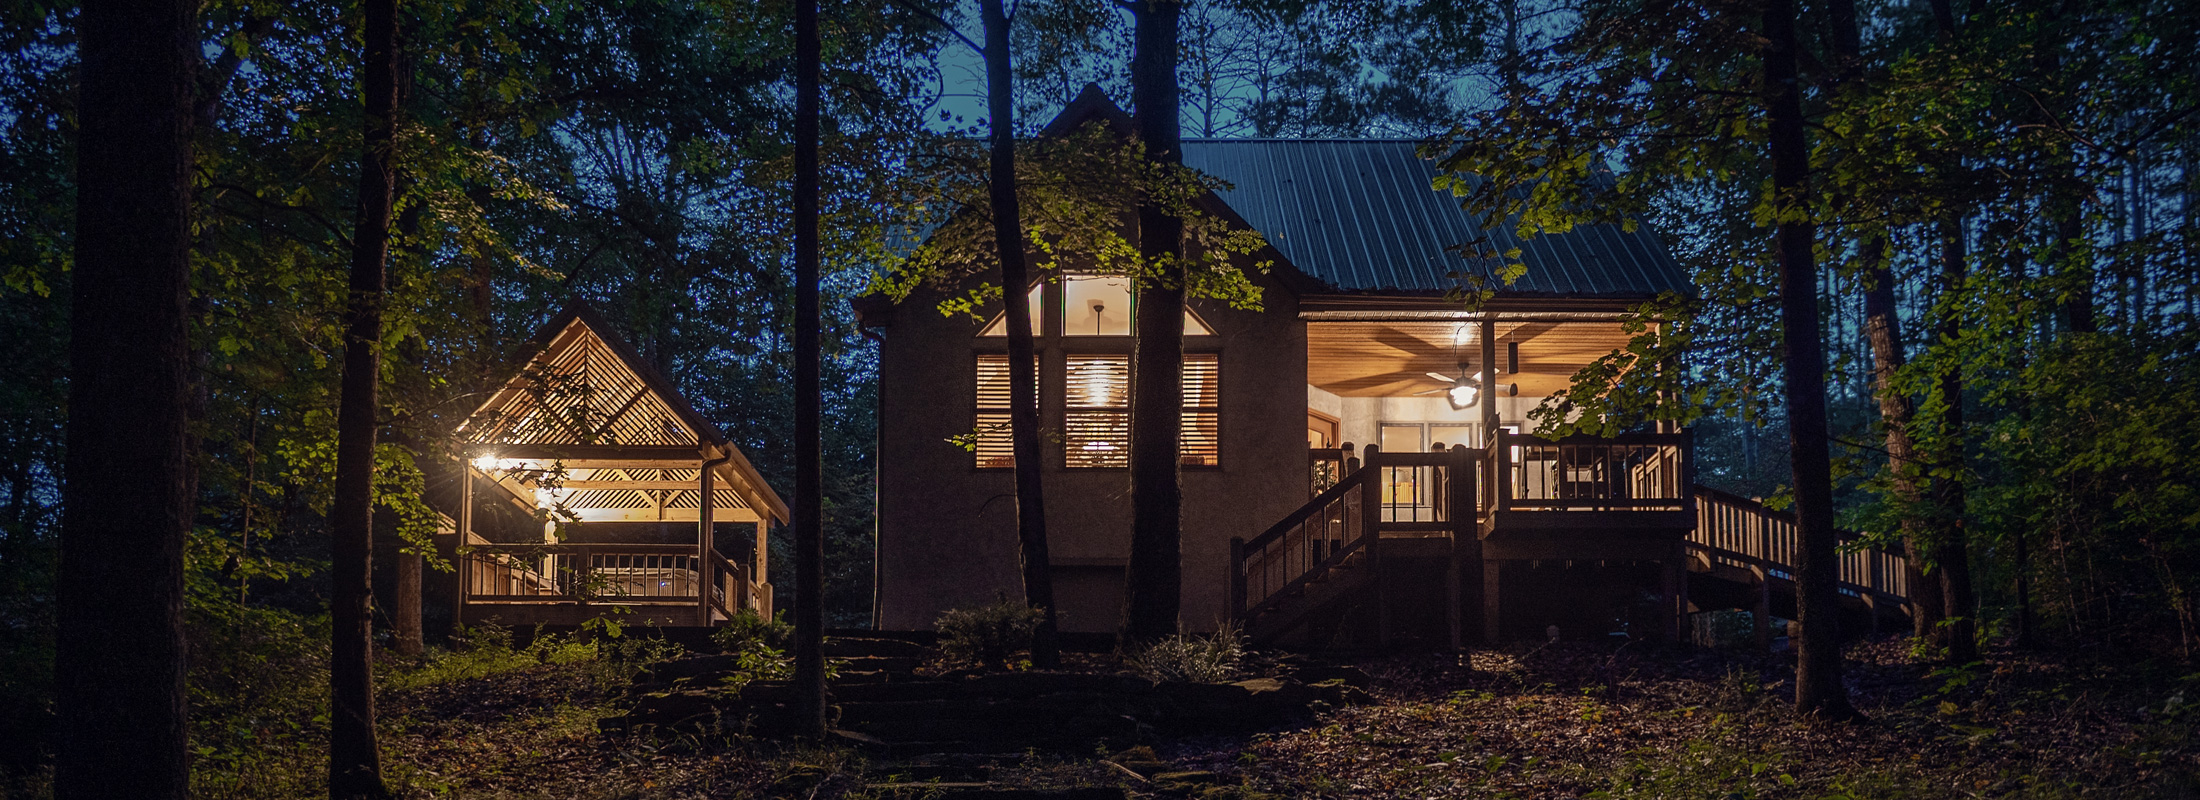 Luxury Romantic Cabins - Enjoy perfect alone time with that special someone.